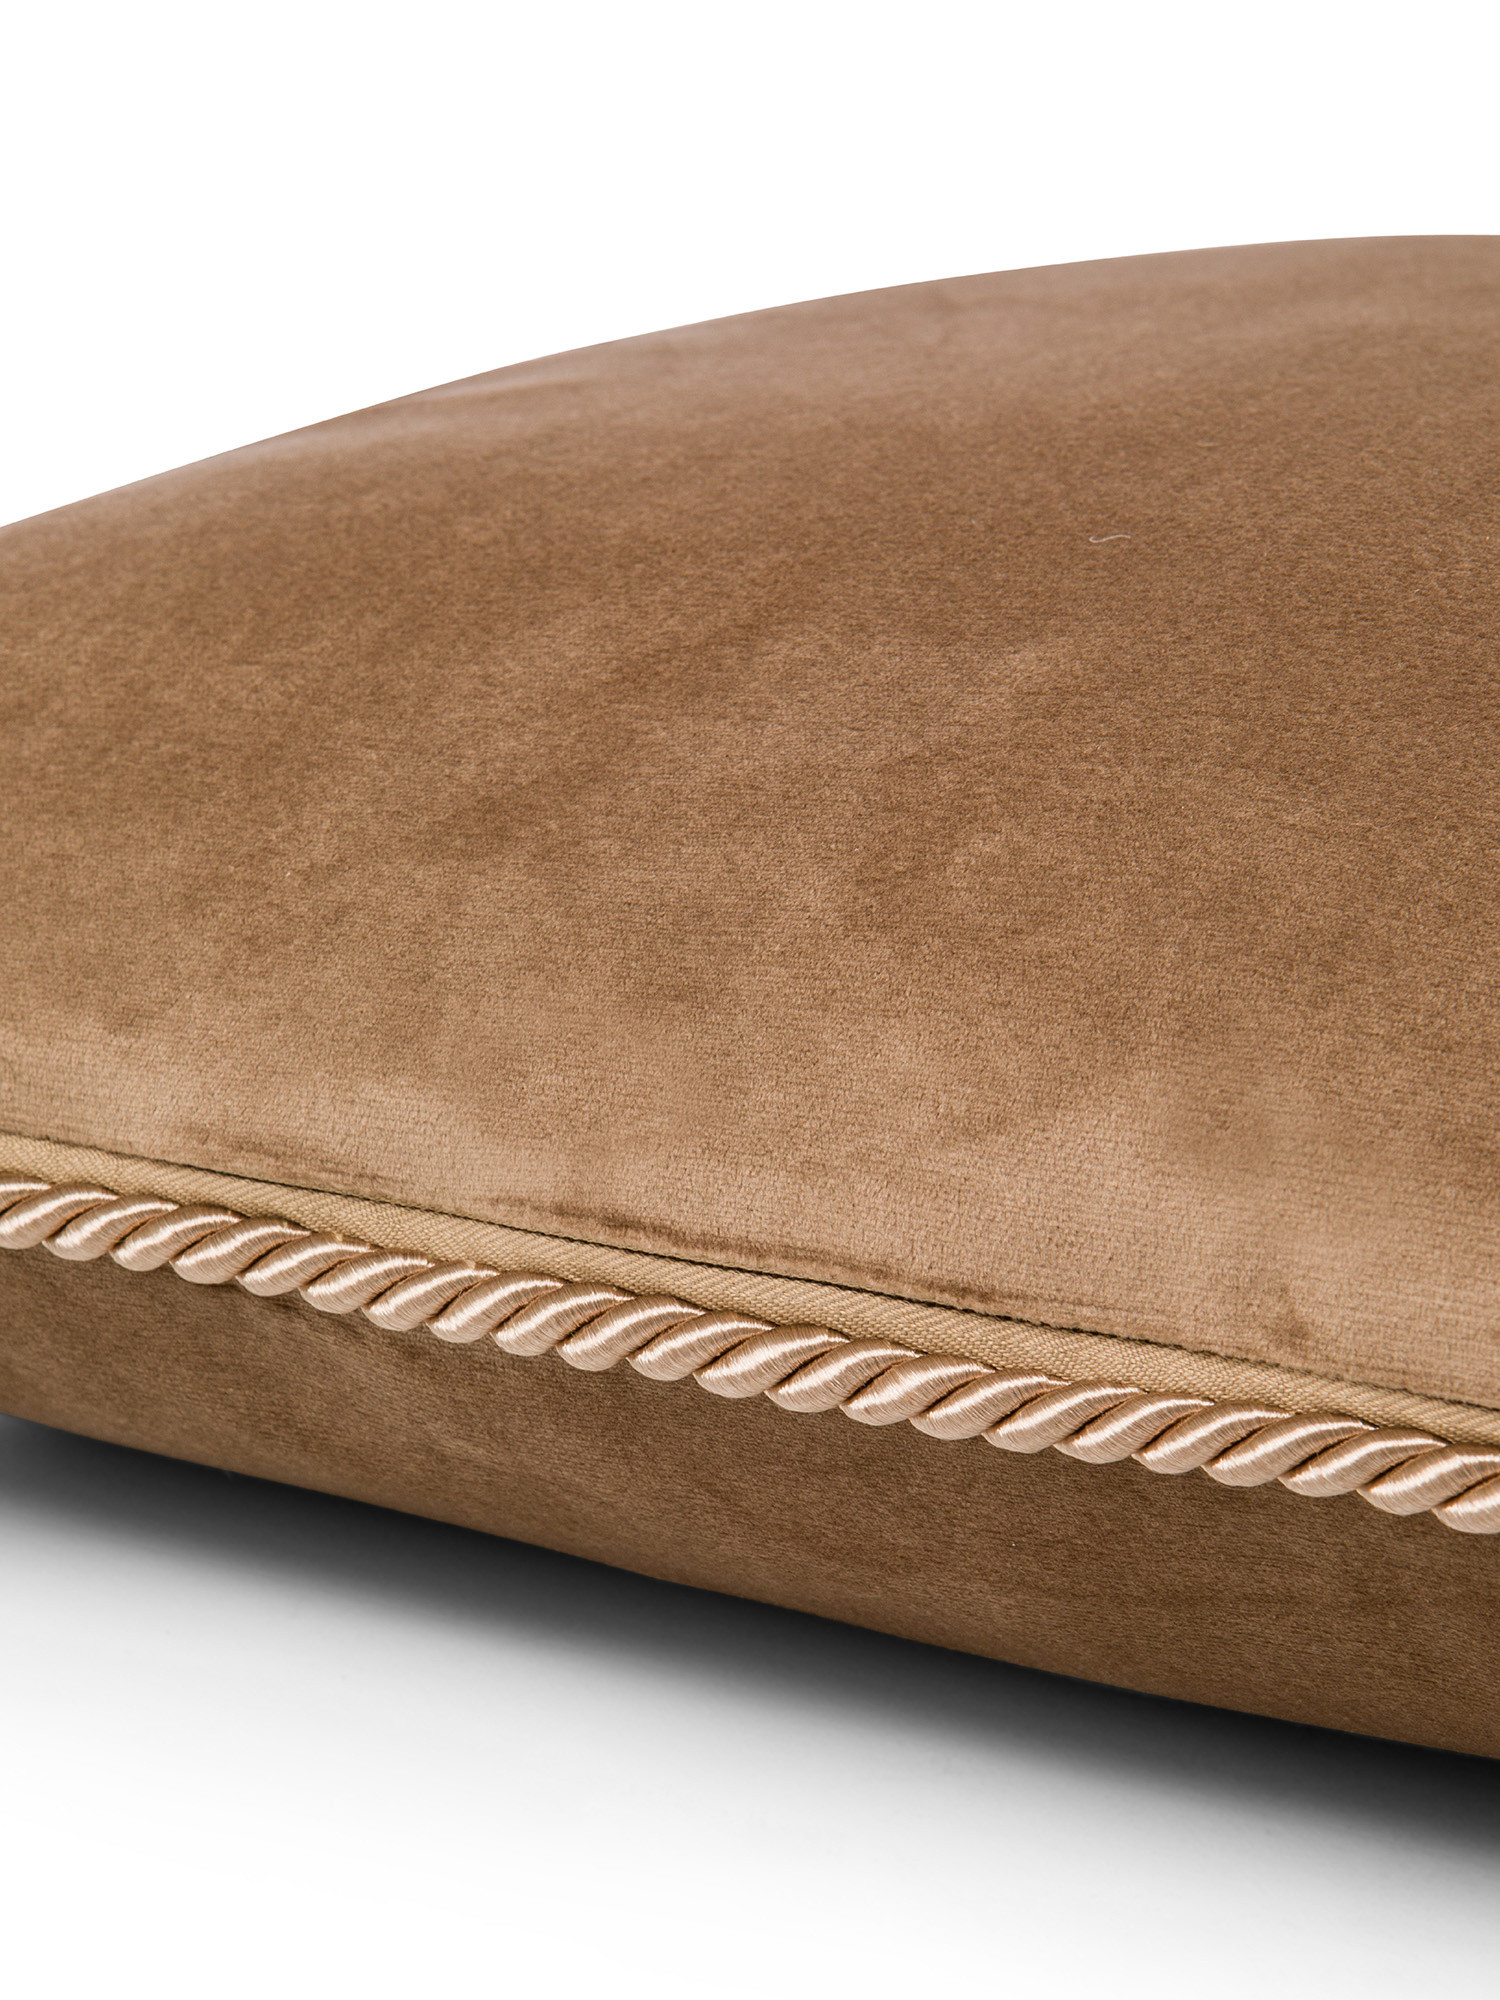 Solid color velvet cushion 45X45cm, TAUPE, large image number 2